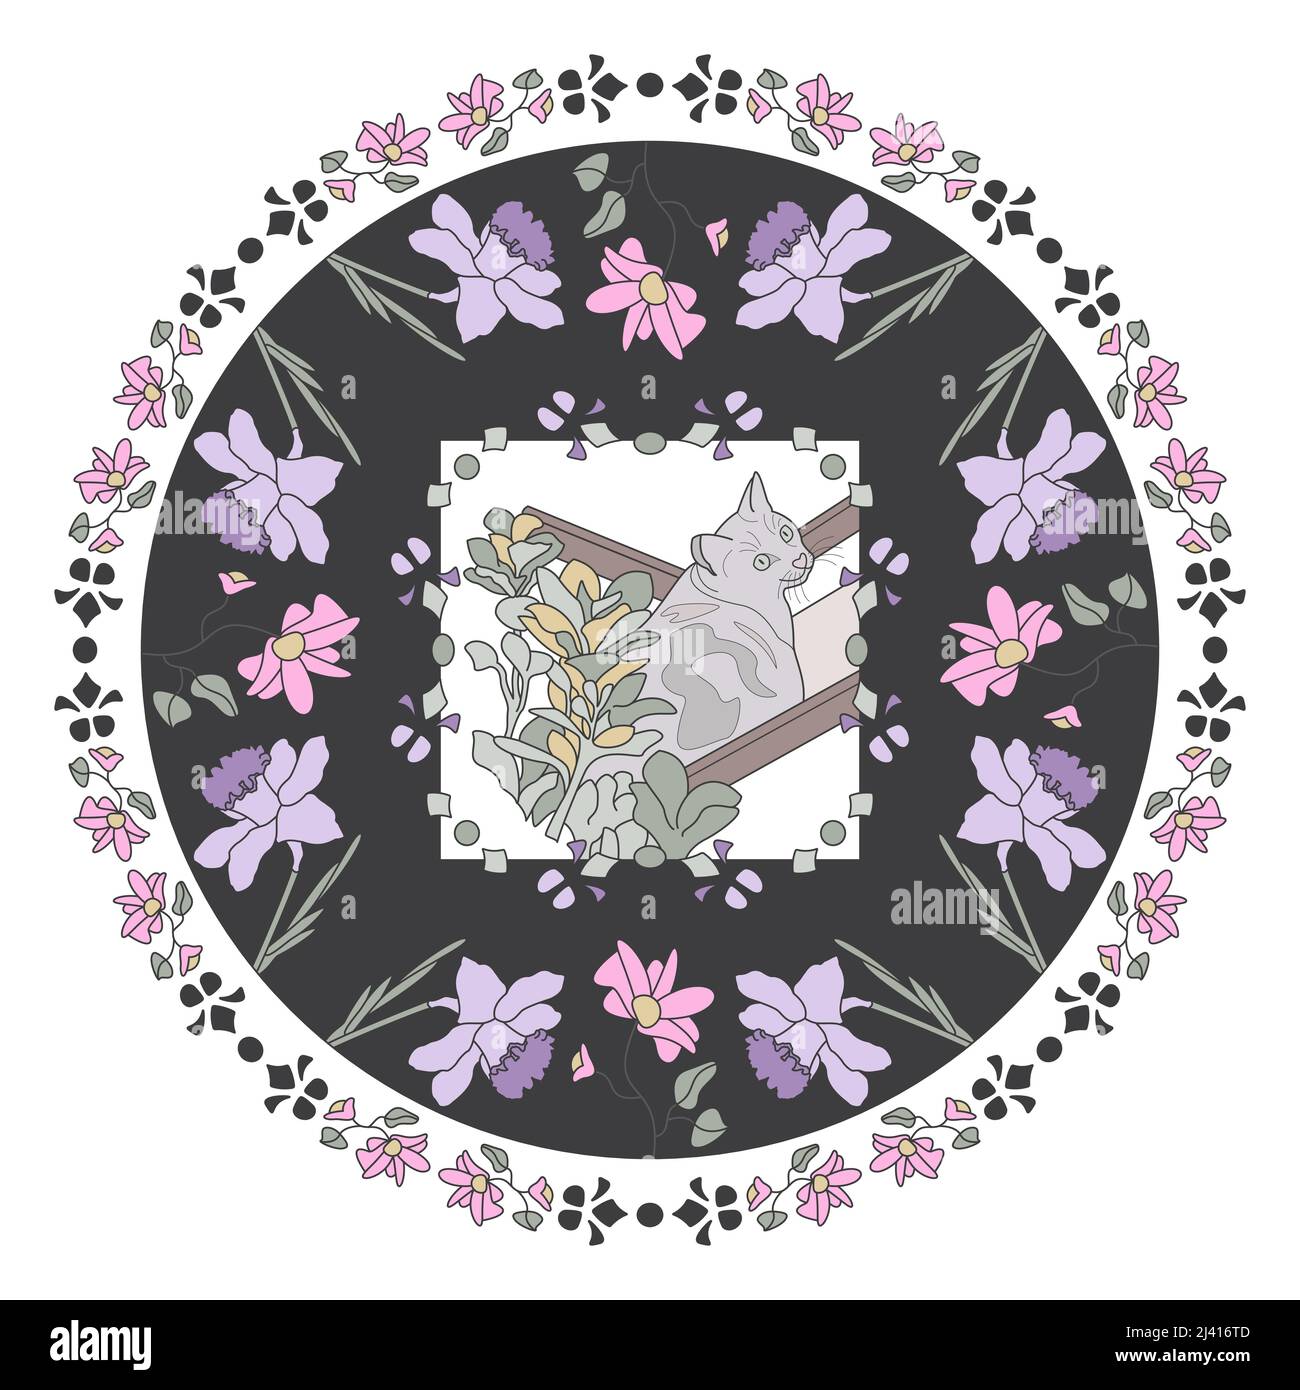 Pattern Mandala. Cute cat in the deckchair with pretty flowers. Background color dark gray. Vector illustration. Stock Vector